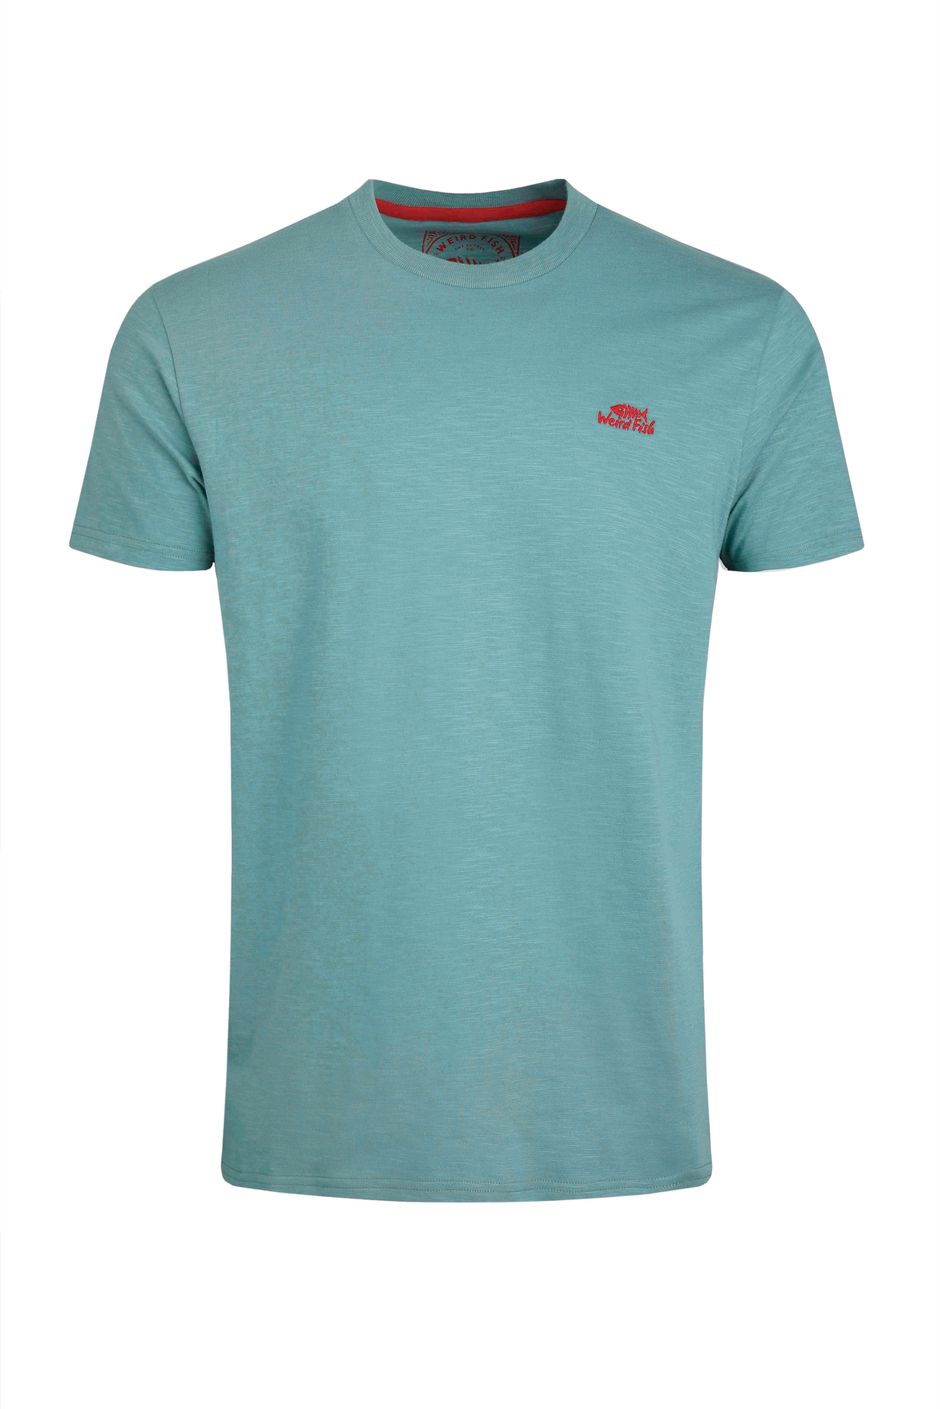 Fished Organic Cotton T-Shirt Mineral Blue